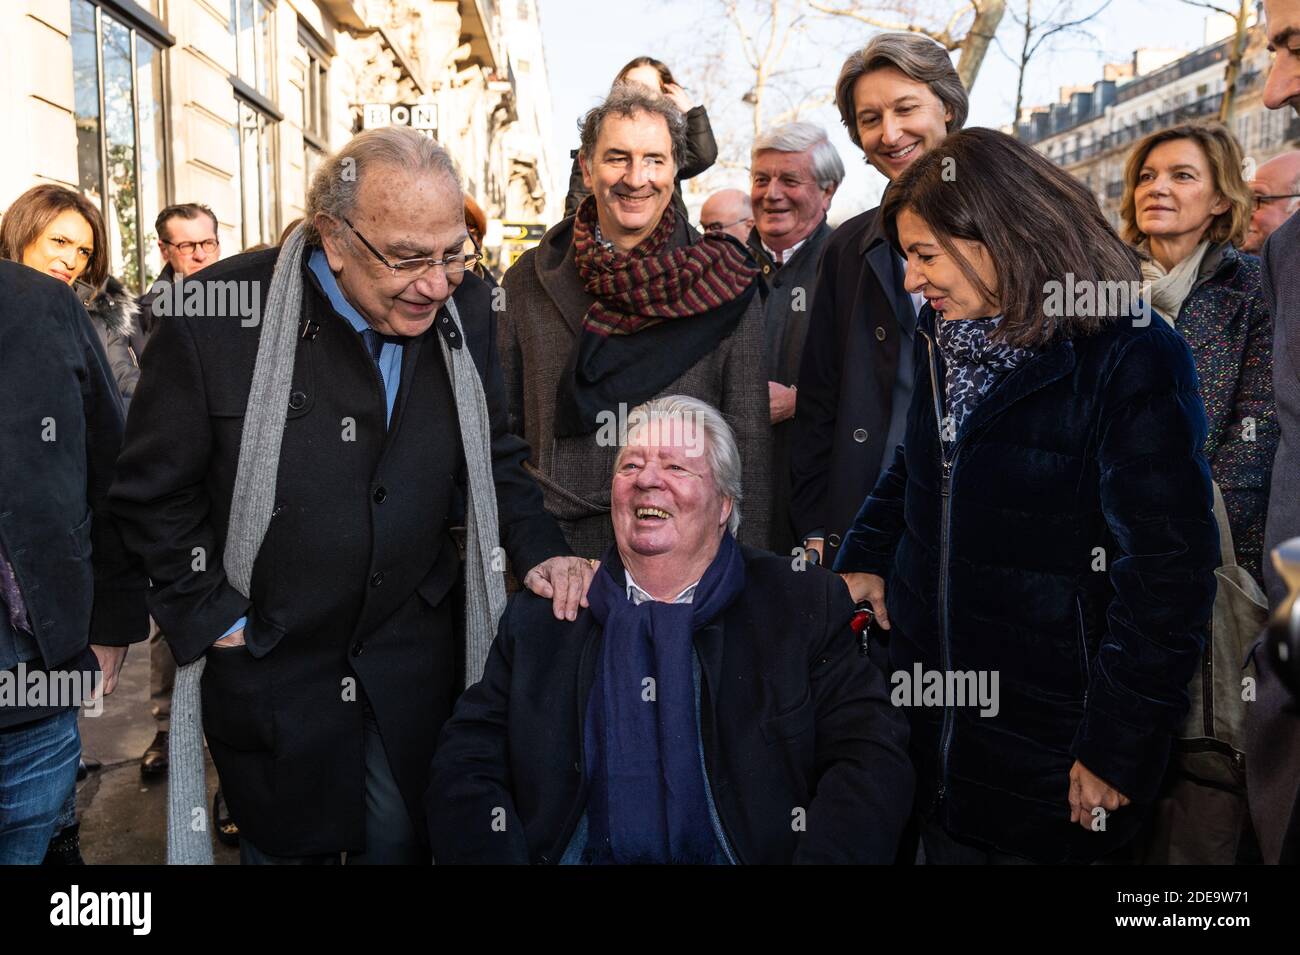 Anne Hidalgo (R.), Mayor of Paris, unveils a wall fresco from a artwork of artist Jean-Jacques Sempe (C. sitting) in presence of the artist, Jacques Aidenbaum (L.), Mayor of the 3rd District, Jean Jacques Decaux, chairman of JC Decaux, François Morel (C. standing) actor and director and Jean Marie Havan artist who painted the wall, at the crossing of Boulevard des Filles du Calvaire and Rue Froissard, 3rd District of Paris, France, Febuary 16th, 2019. Photo by Daniel Derajinski/ABACAPRESS.COM Stock Photo